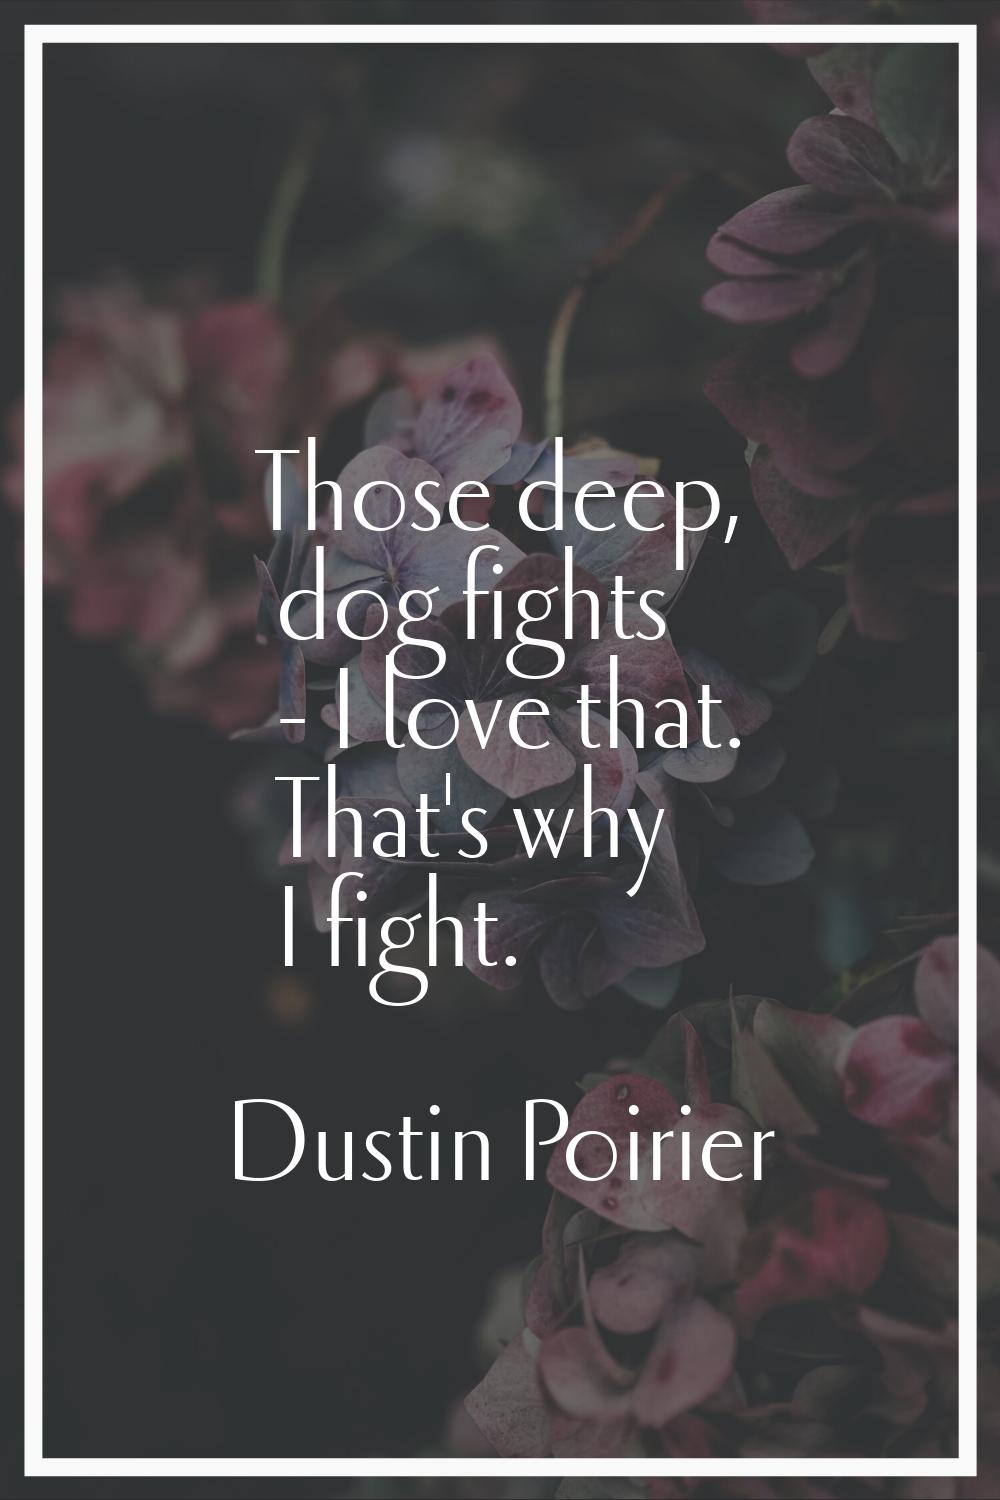 Those deep, dog fights - I love that. That's why I fight.